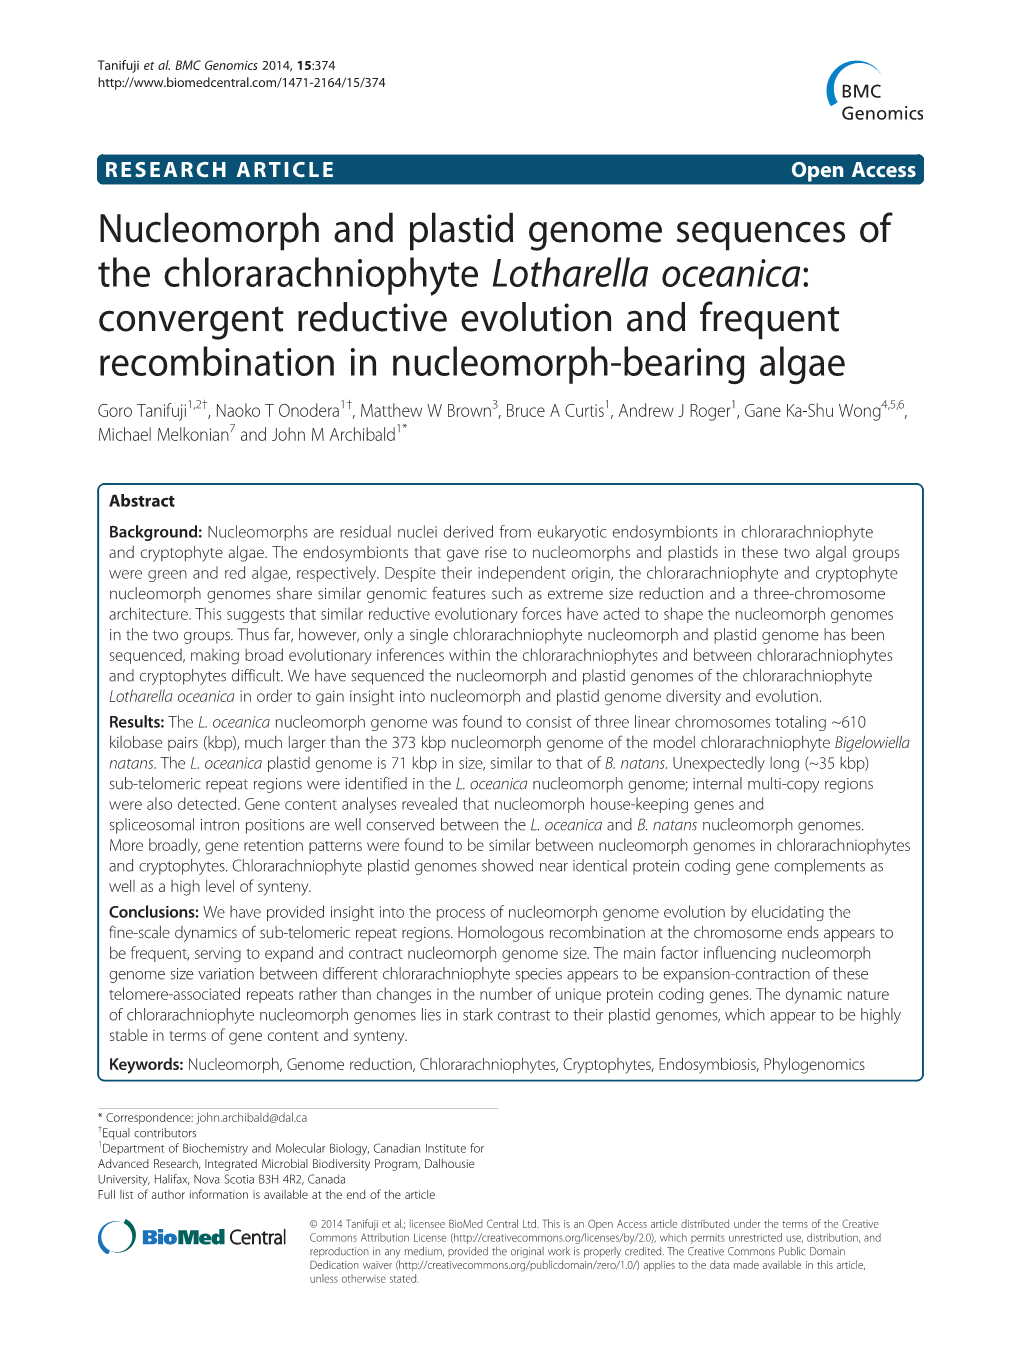 Nucleomorph and Plastid Genome Sequences of The